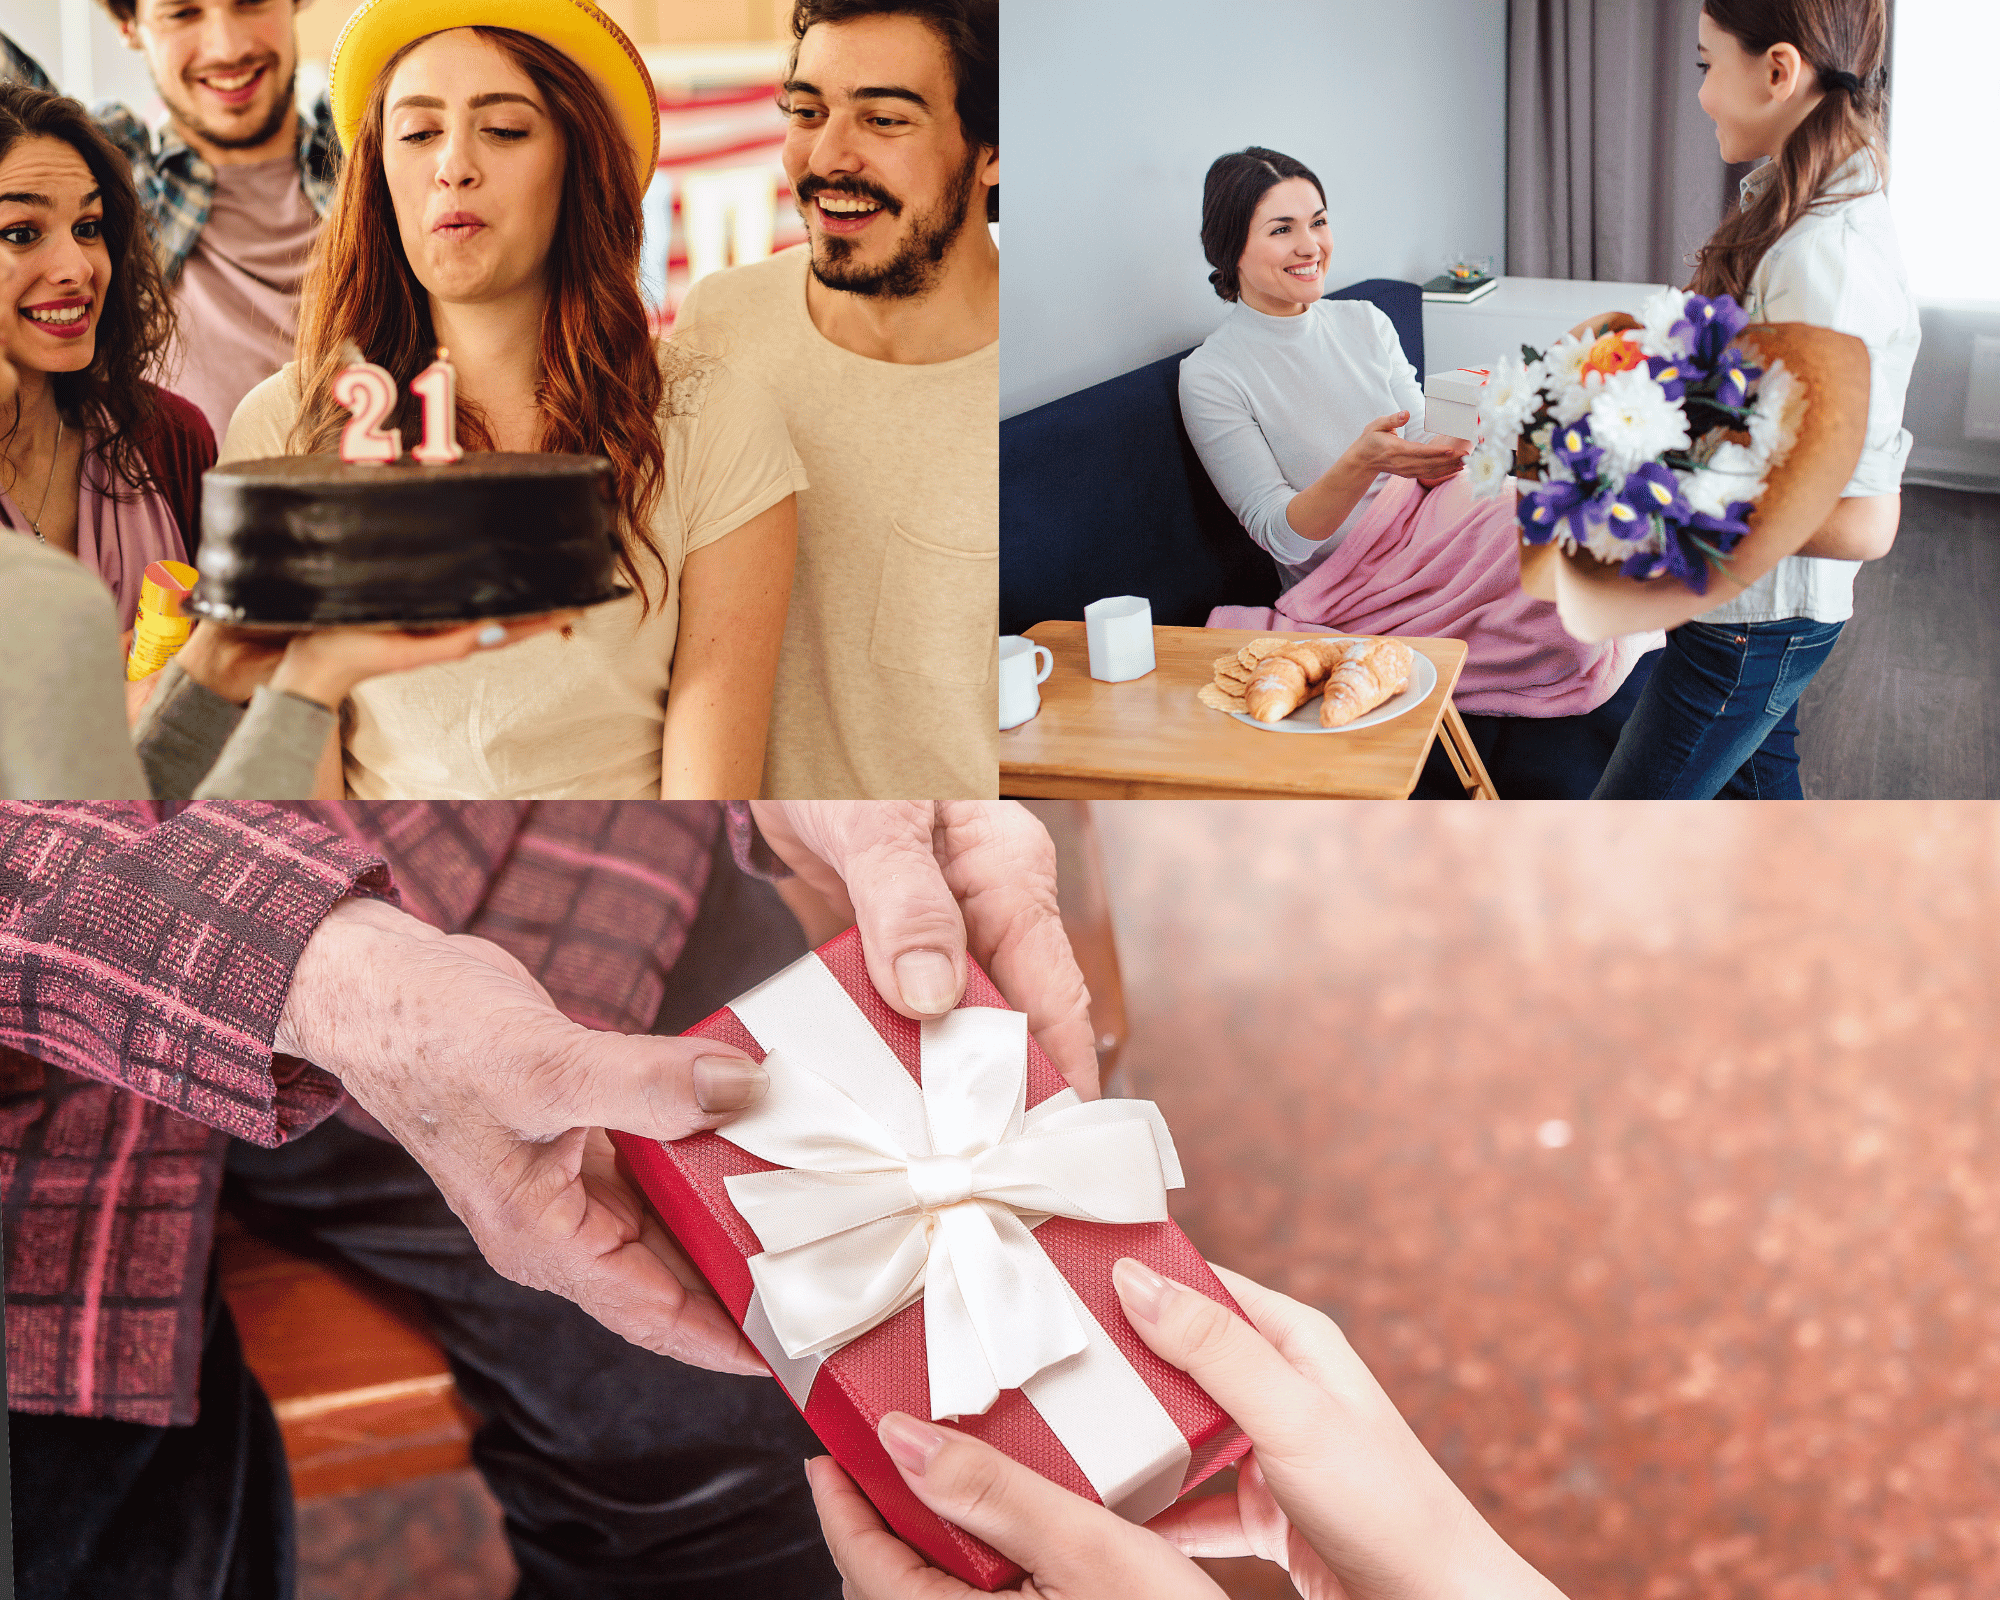 21st Birthday Memorable Gifts for Daughter That She’ll Absolutely Love